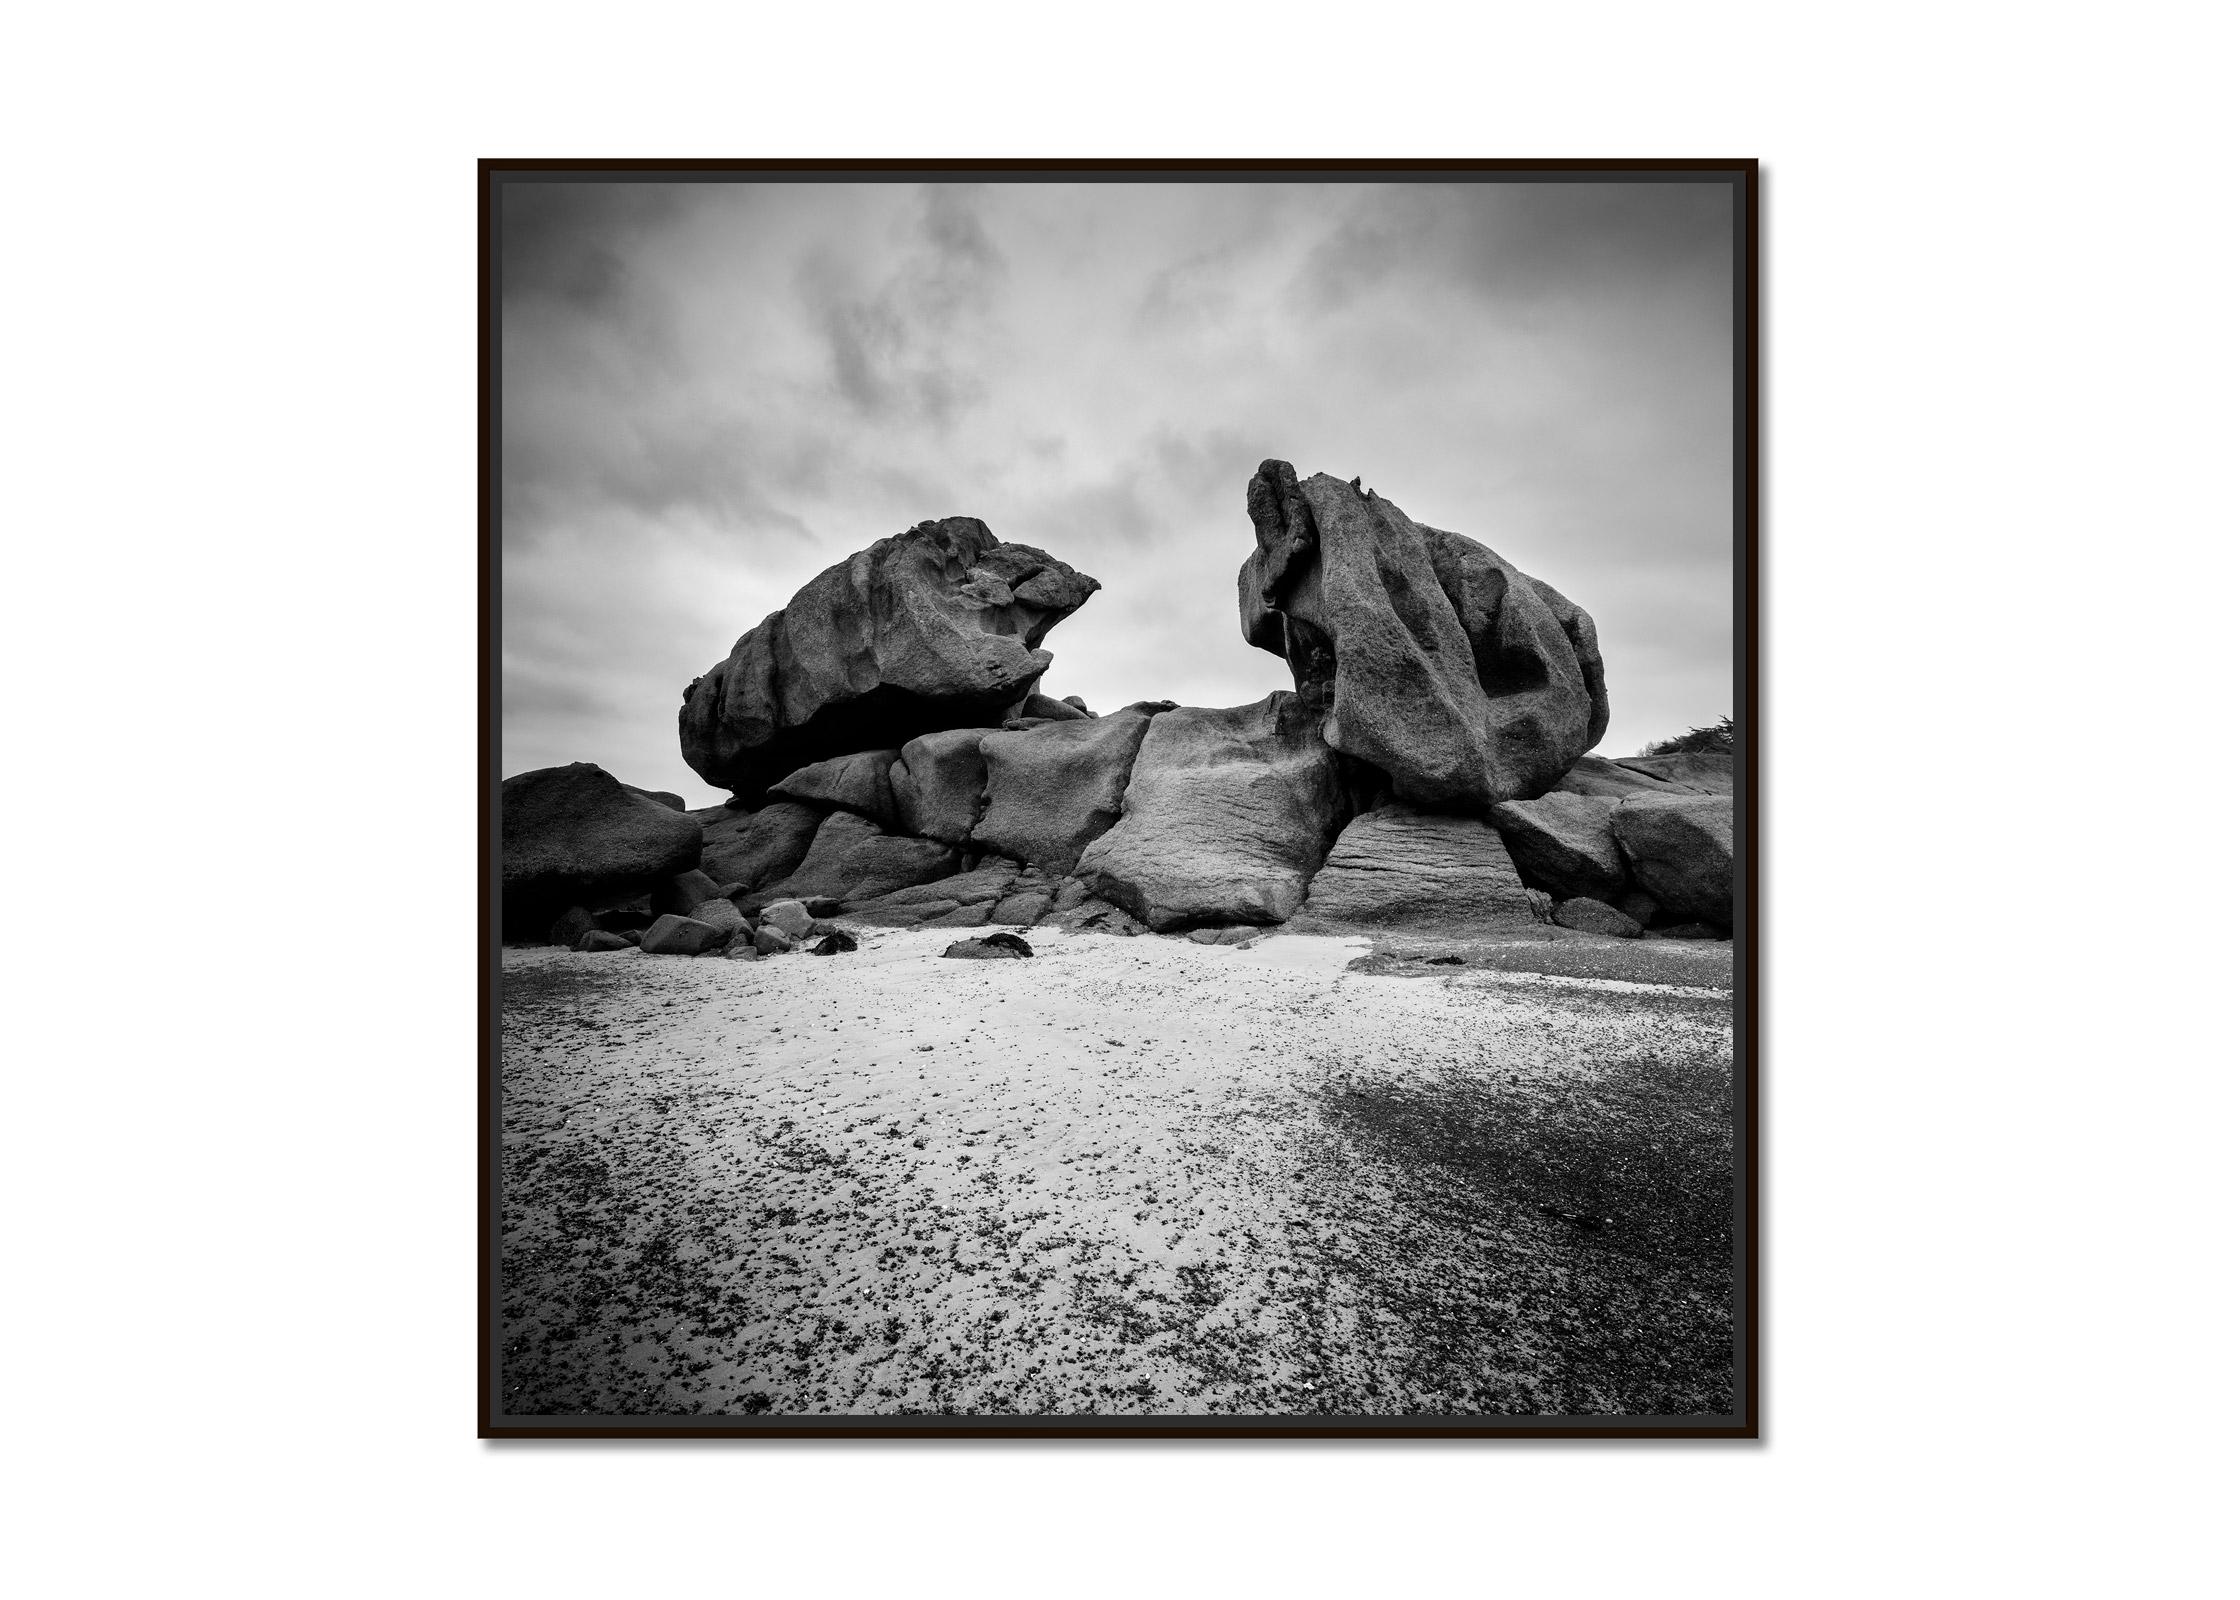 Crab Claws Rock, Granite Coast, France, black and white landscape photography - Photograph by Gerald Berghammer